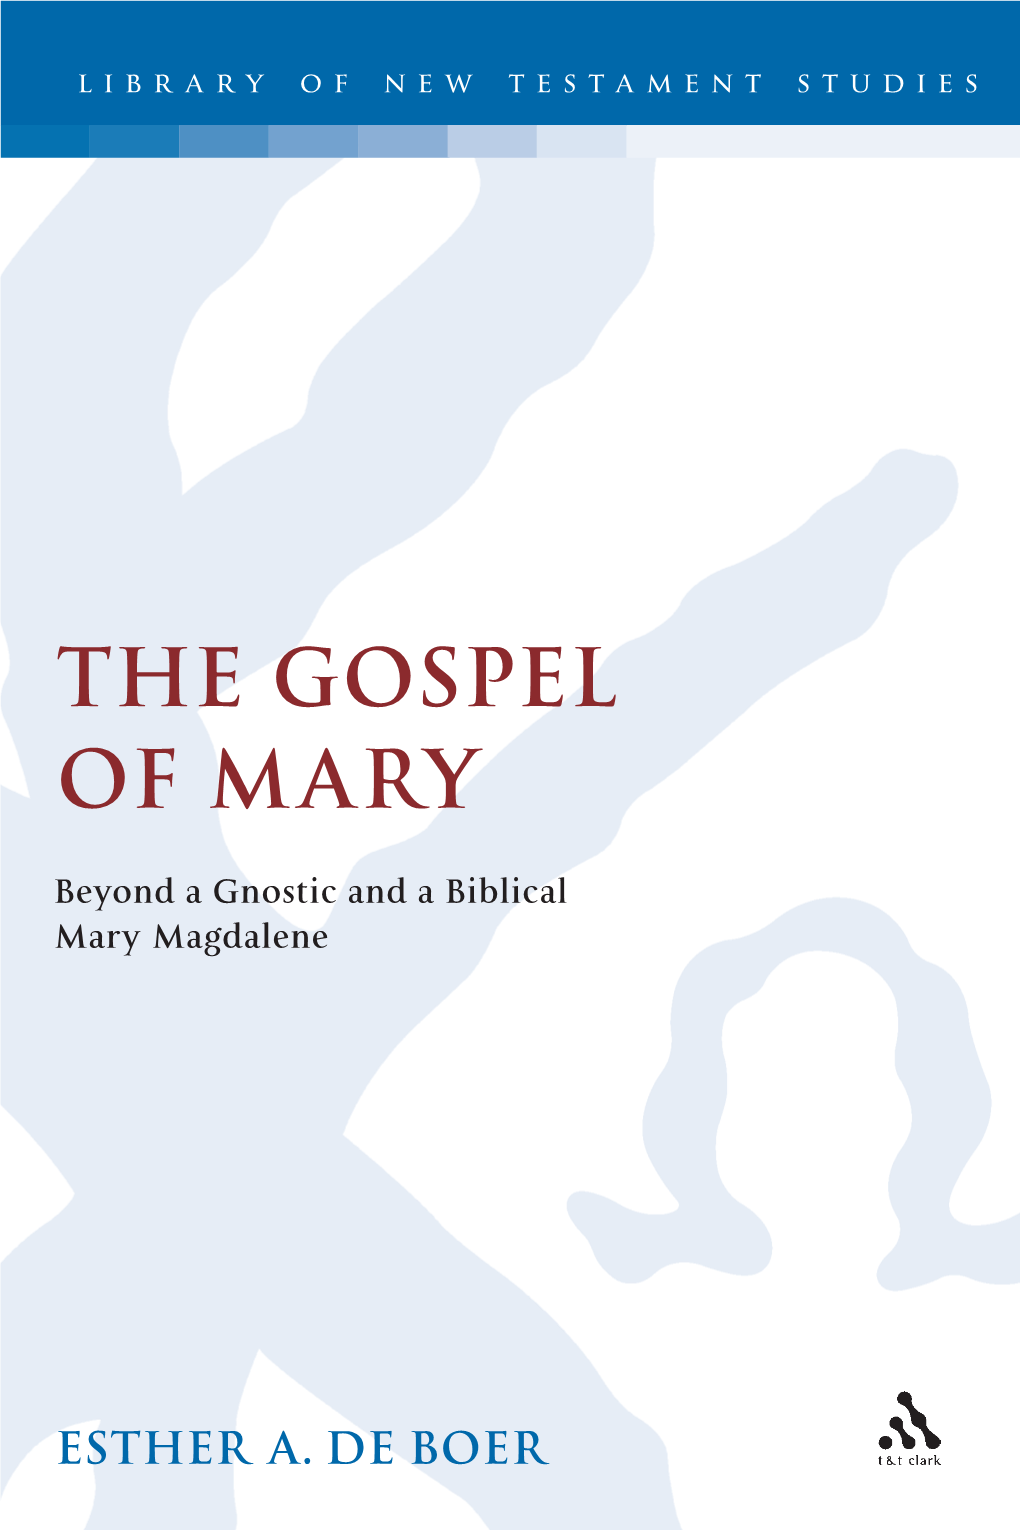 The Gospel of Mary. Beyond a Gnostic and a Biblical Mary Magdalene